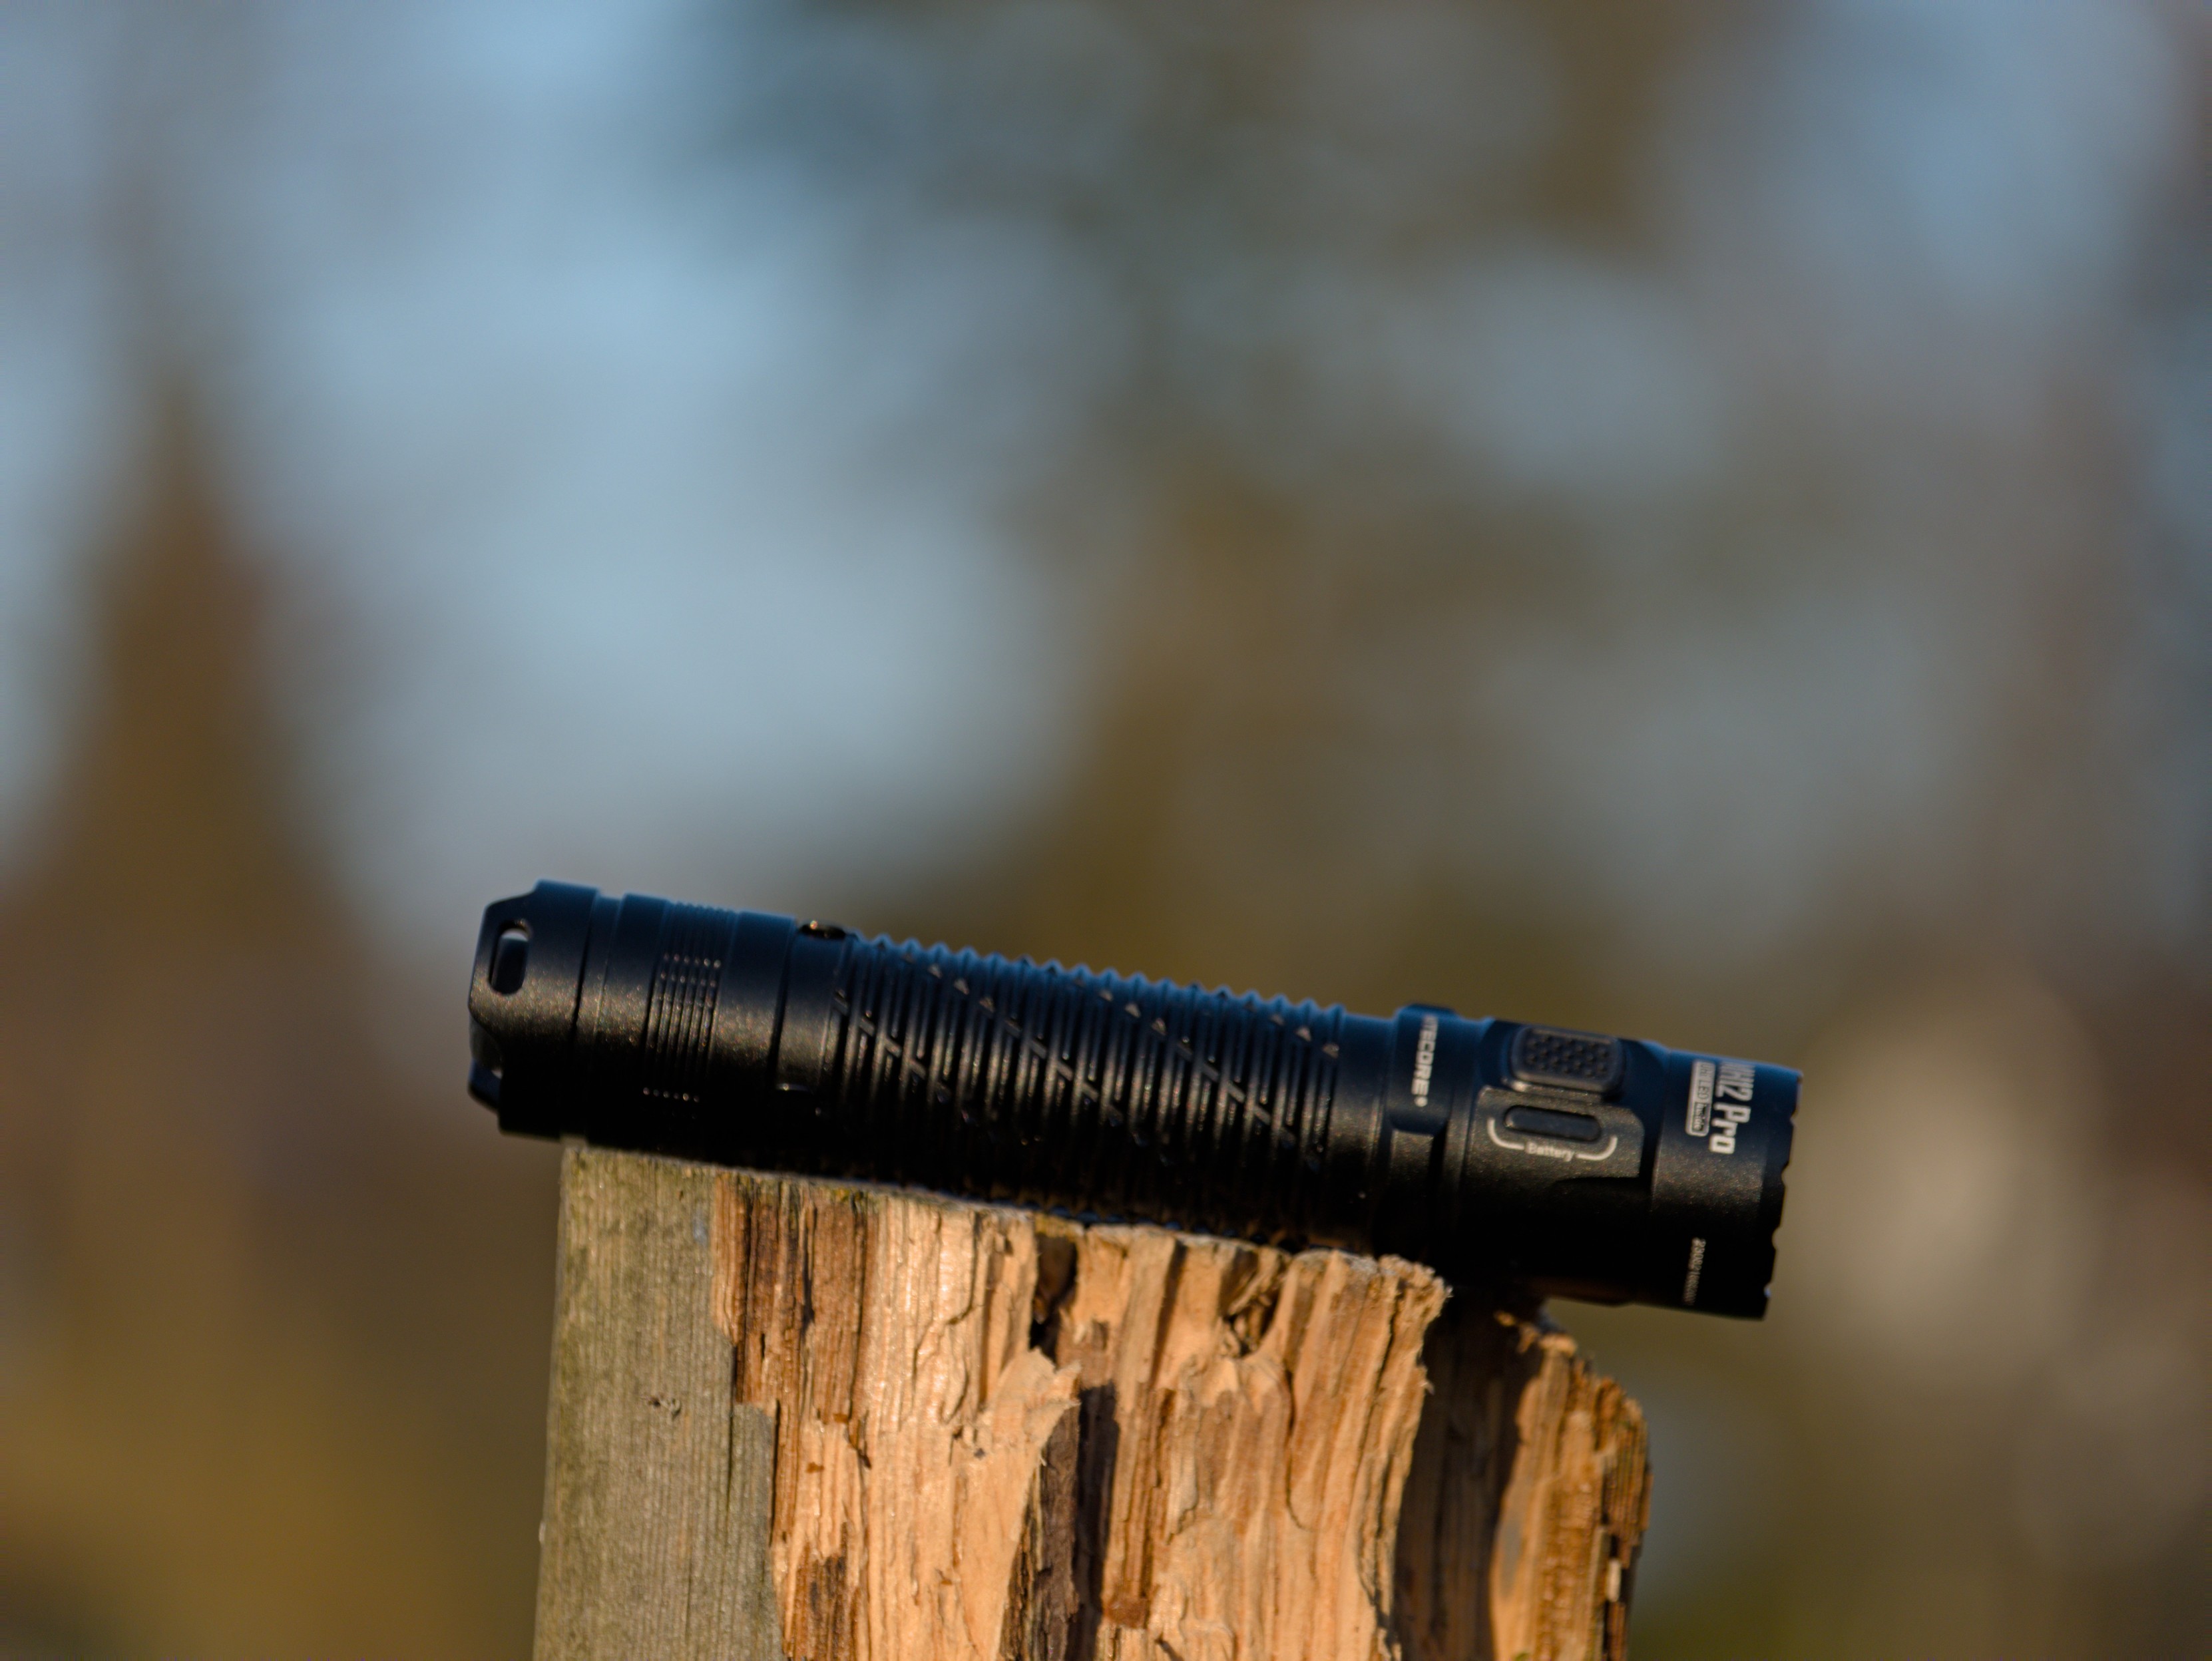 A Nitecore MH12 Pro flashlight on top of a wooden post, with a blurred background